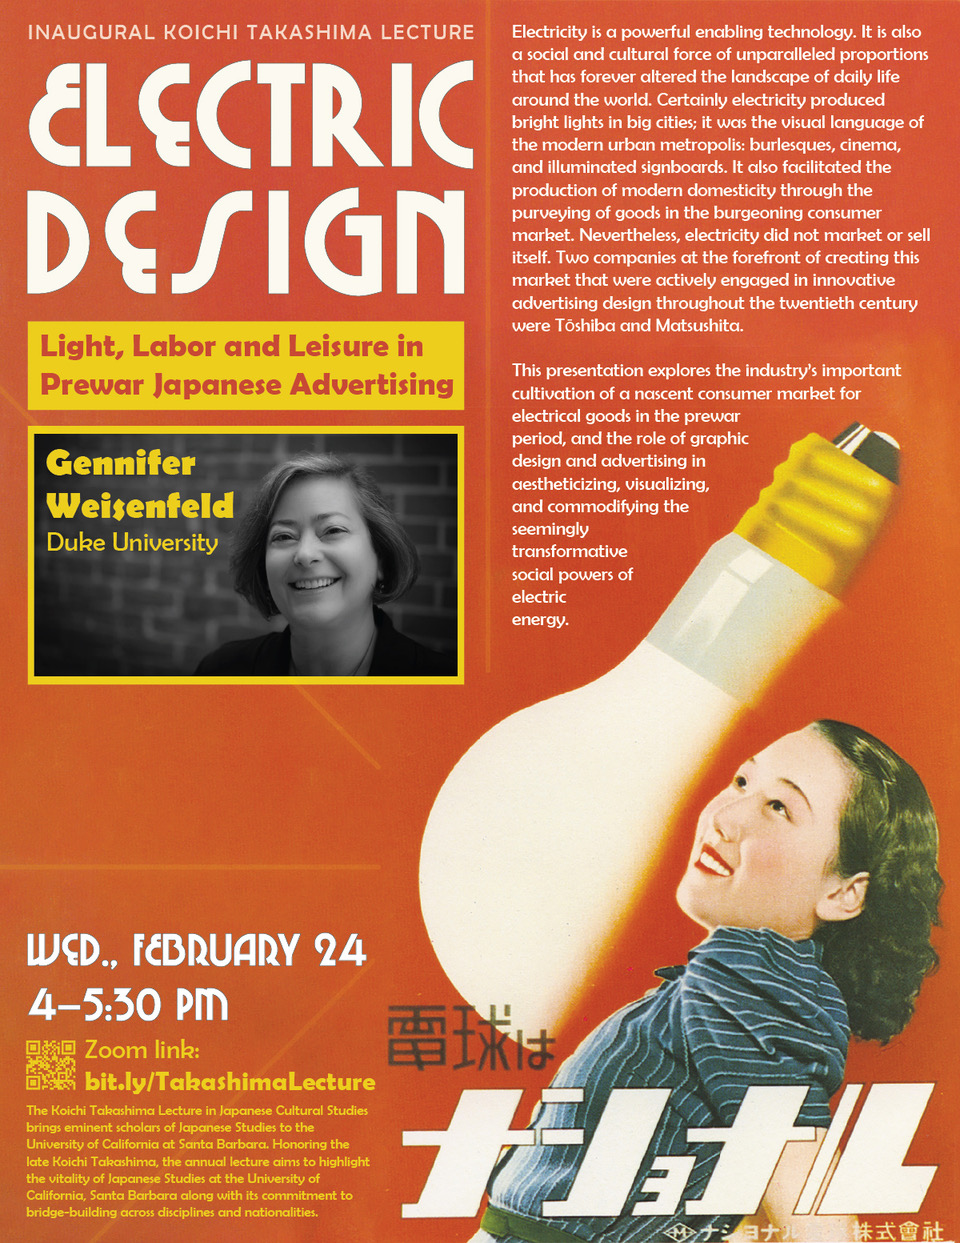 Flyer for "Electric Design: Light, Labor, and Leisure in Prewar Japanese Advertising" featuring Gennifer Weisenfeld from Duke University on 2/24 at 4-5:30Pm